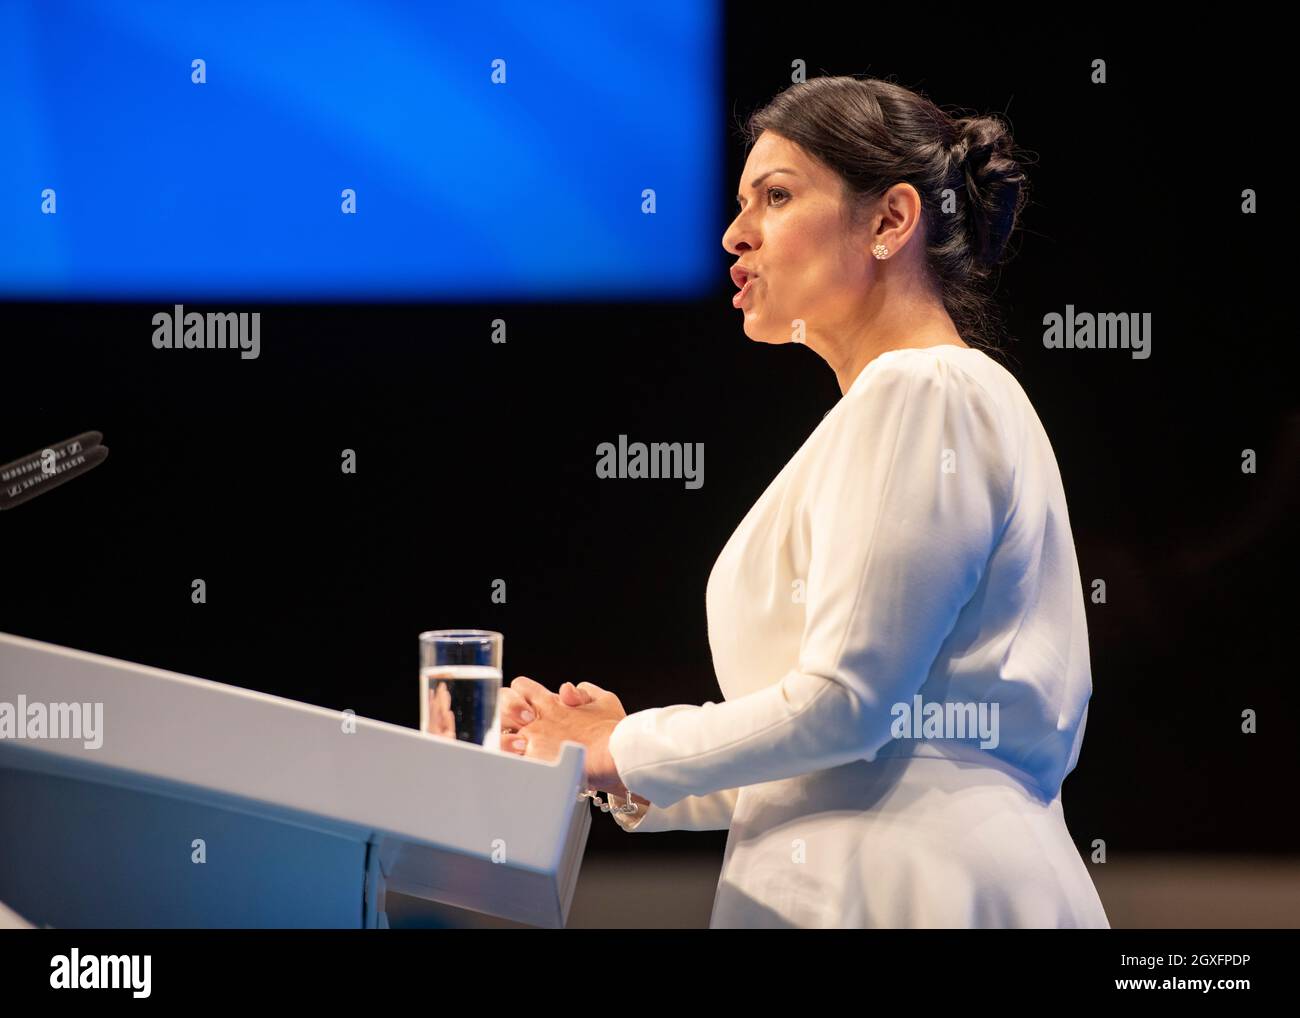 Manchester, England, UK. 5th Oct, 2021. PICTURED: Rt Priti Patel MP - UK Home Secretary delivering her key note speech to Conference. Scenes during the at the Conservative party Conference #CPC21. Credit: Colin Fisher/Alamy Live News Stock Photo